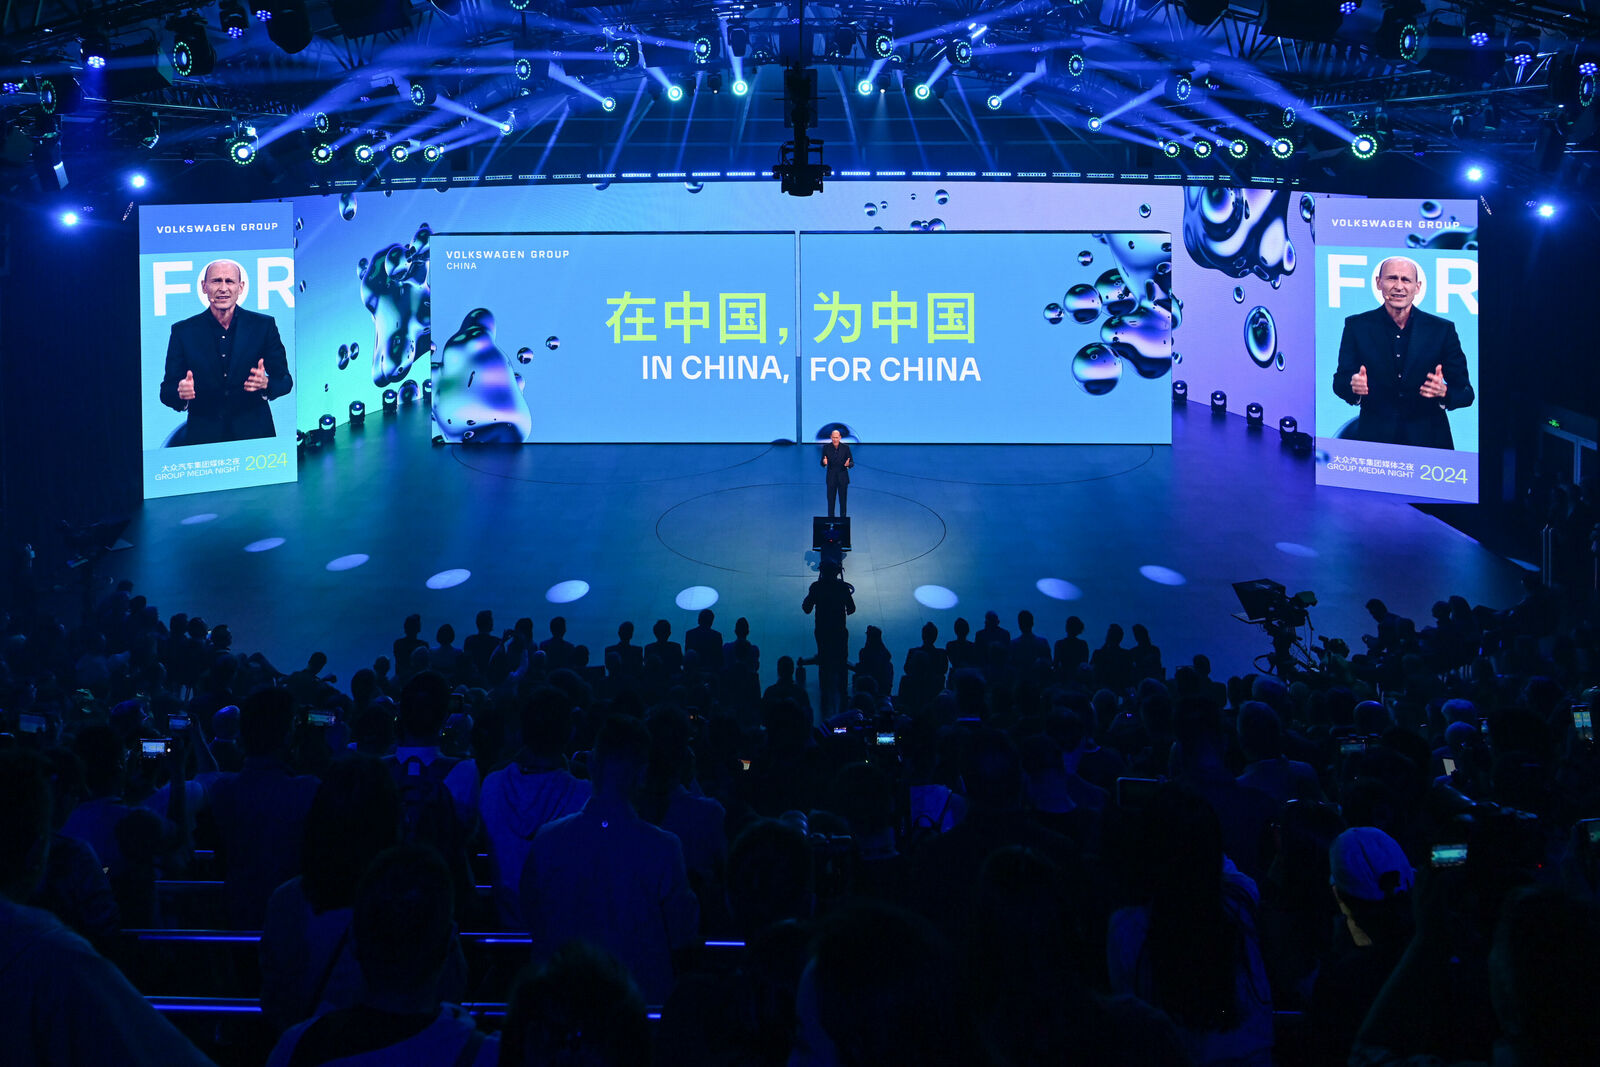 A speaker stands at the center of a brightly lit stage, addressing a large audience. The backdrop displays the slogan "IN CHINA, FOR CHINA" in both English and Chinese, highlighting Volkswagen Group's strategic focus on the Chinese market.